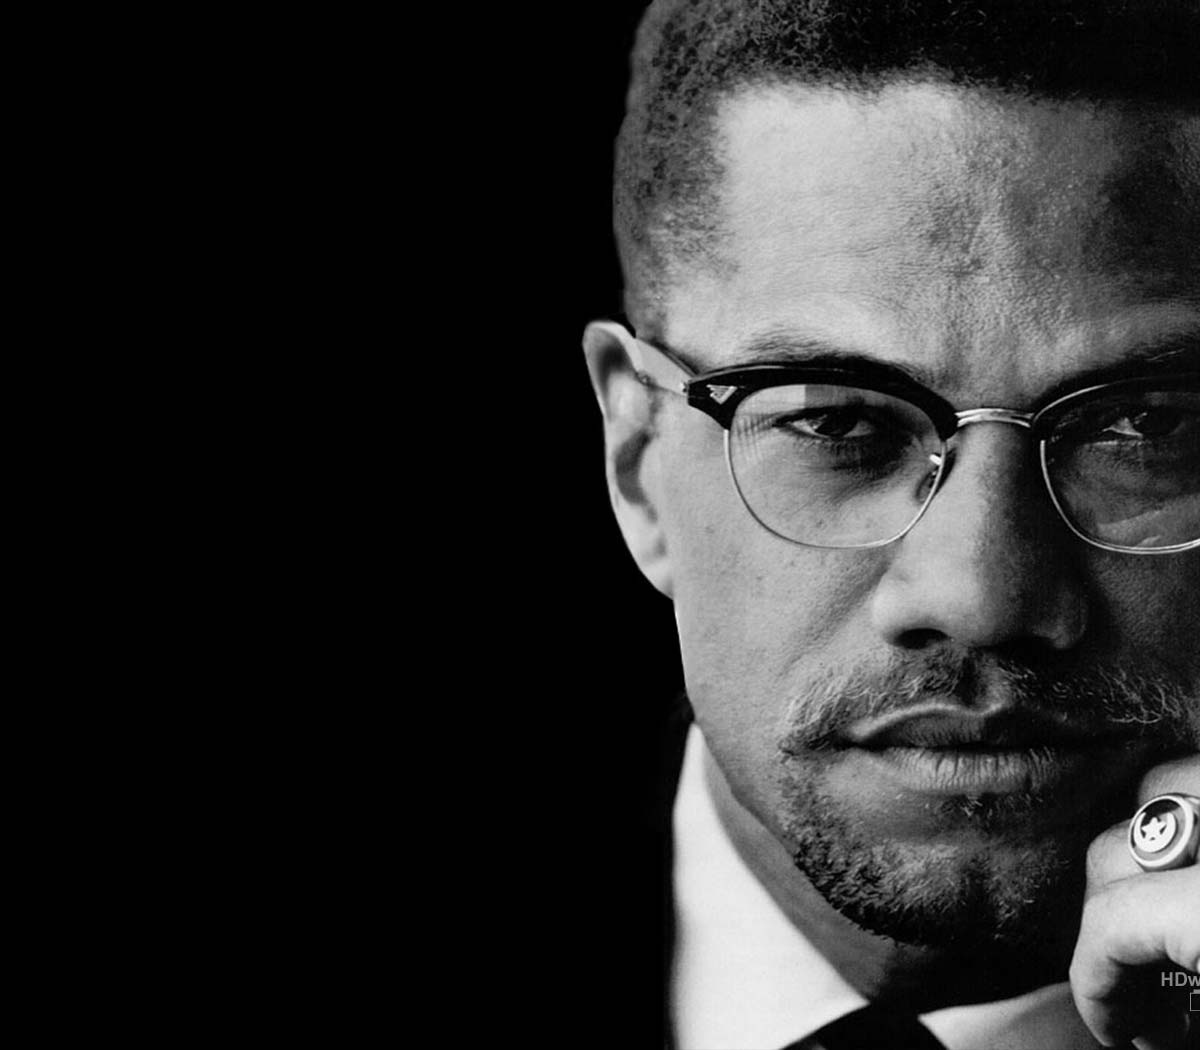 University Student Writes Malcolm X Is Valued Hero For Today’s Times